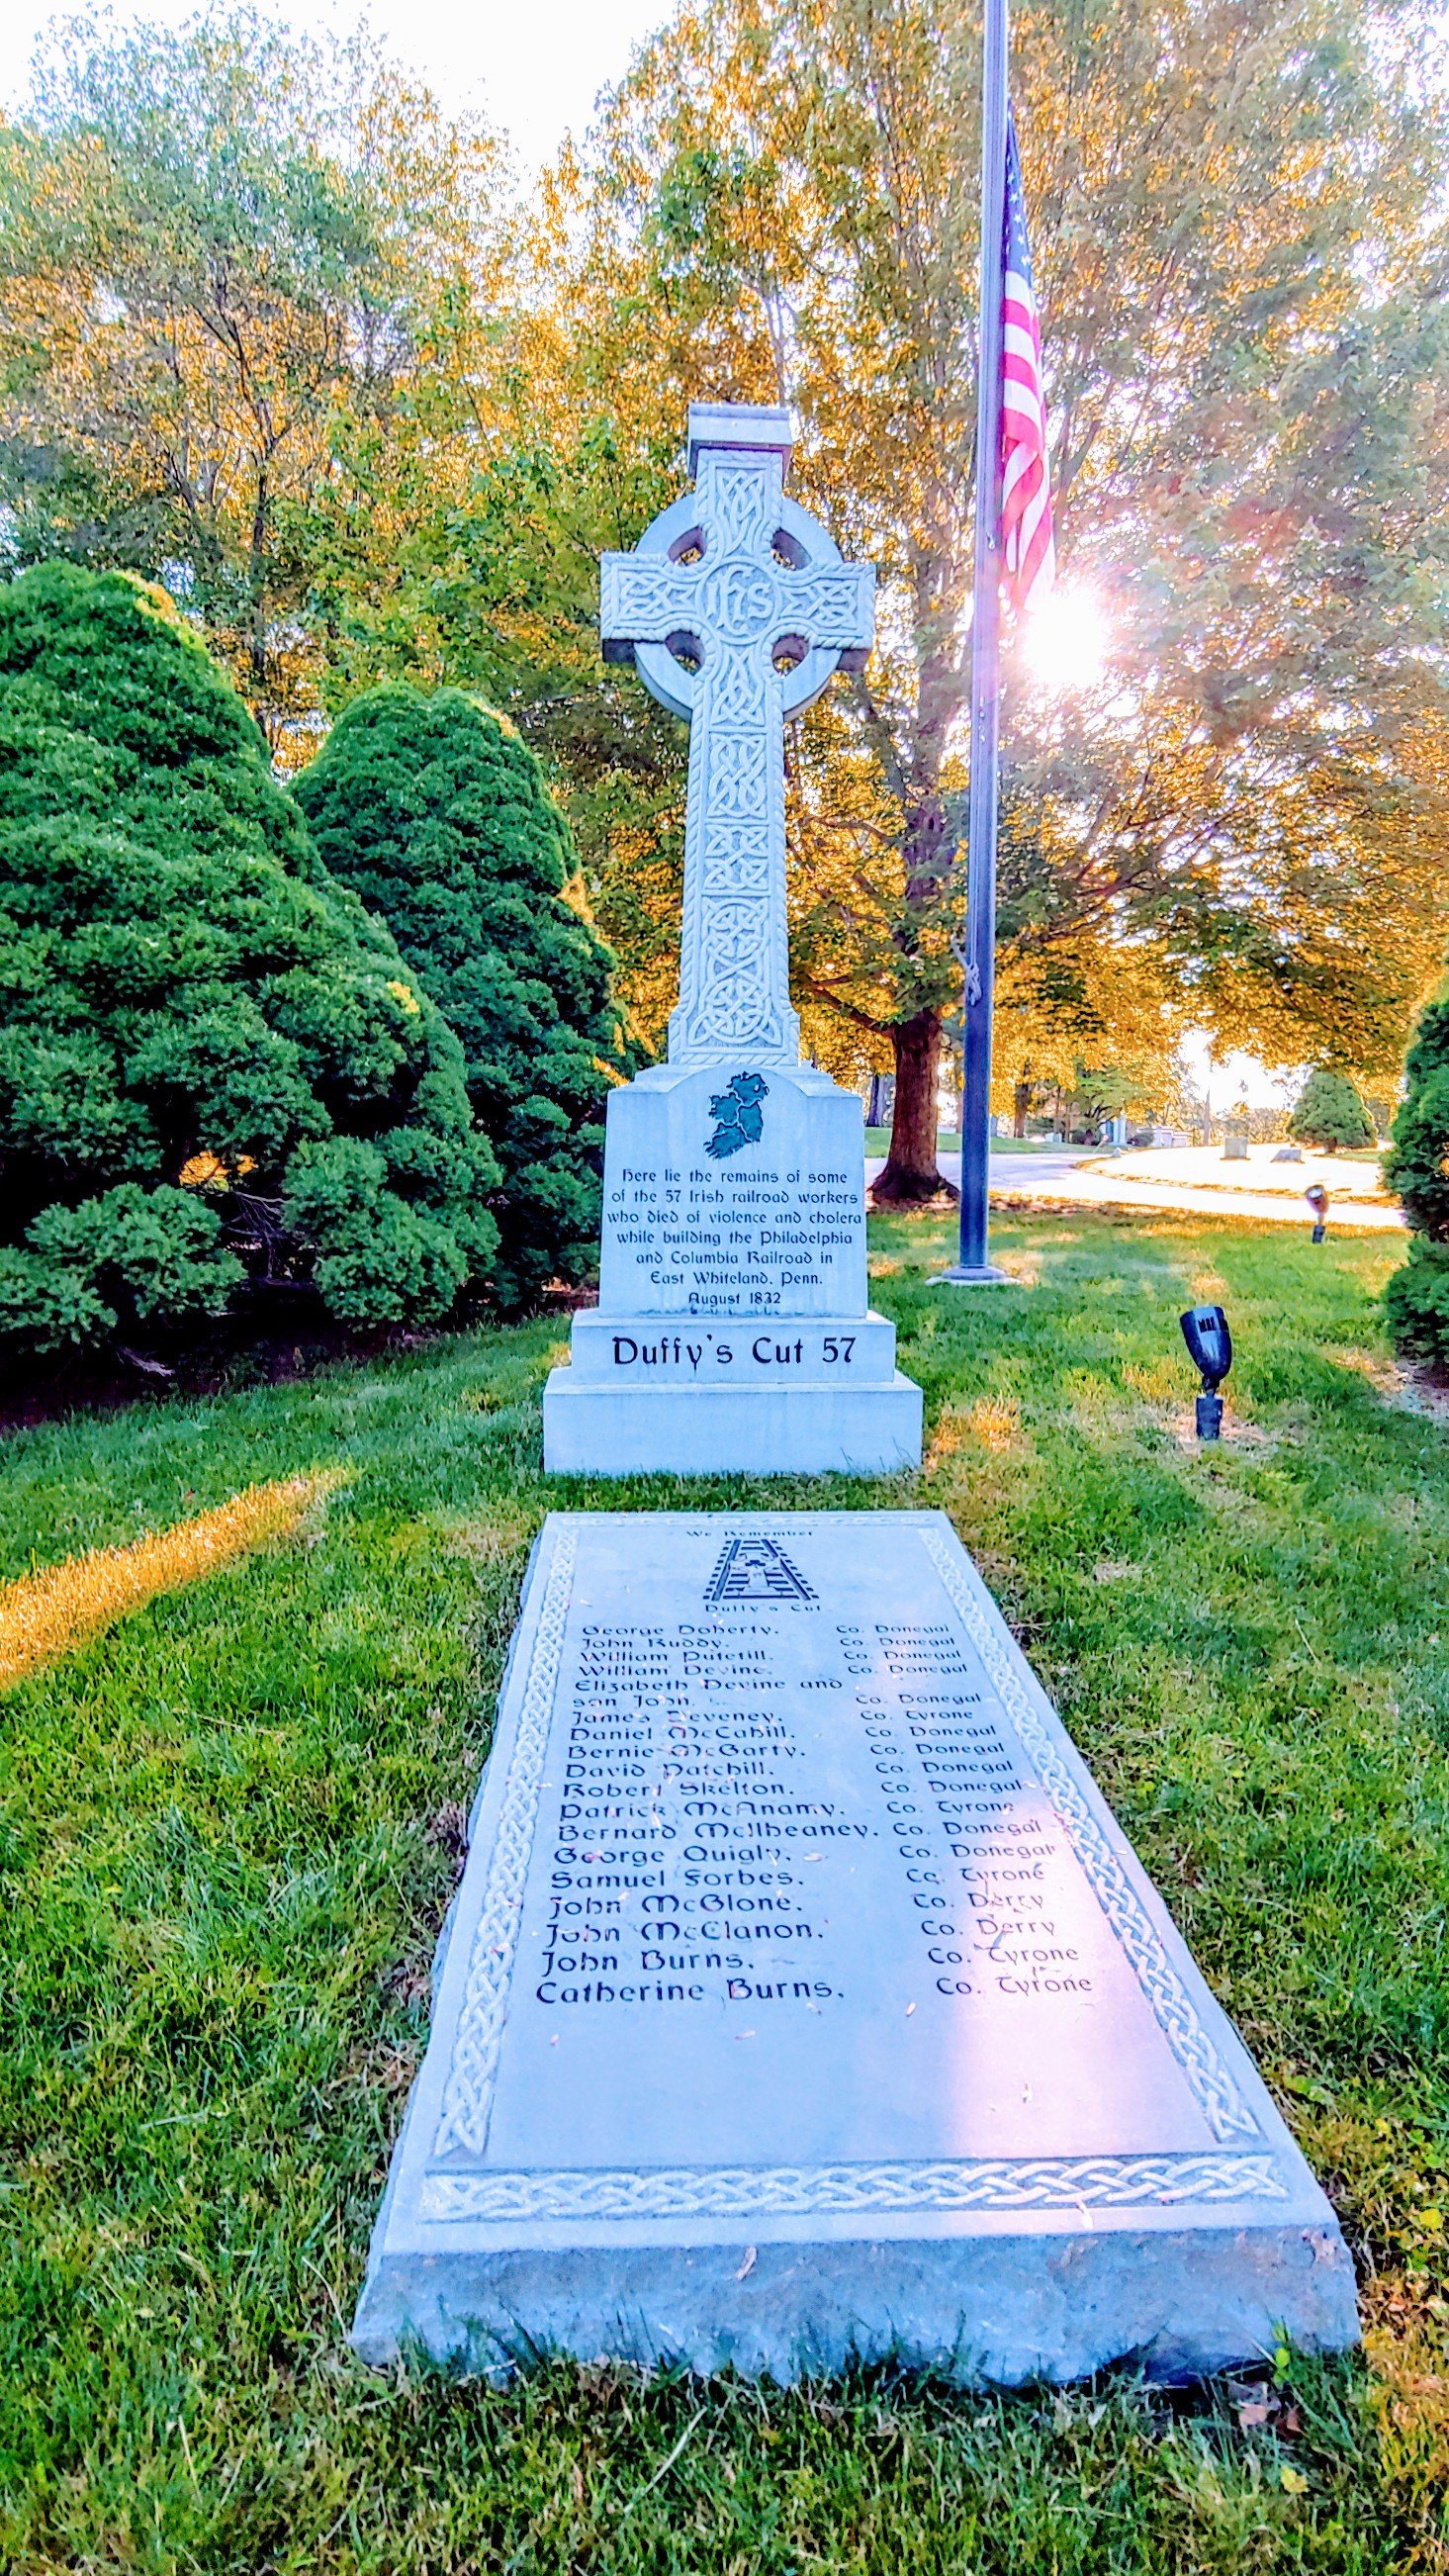  The Duffy's Cut burial site and memorial at West Laurel Hill Cemetery in Bala Cynwyd, PA 